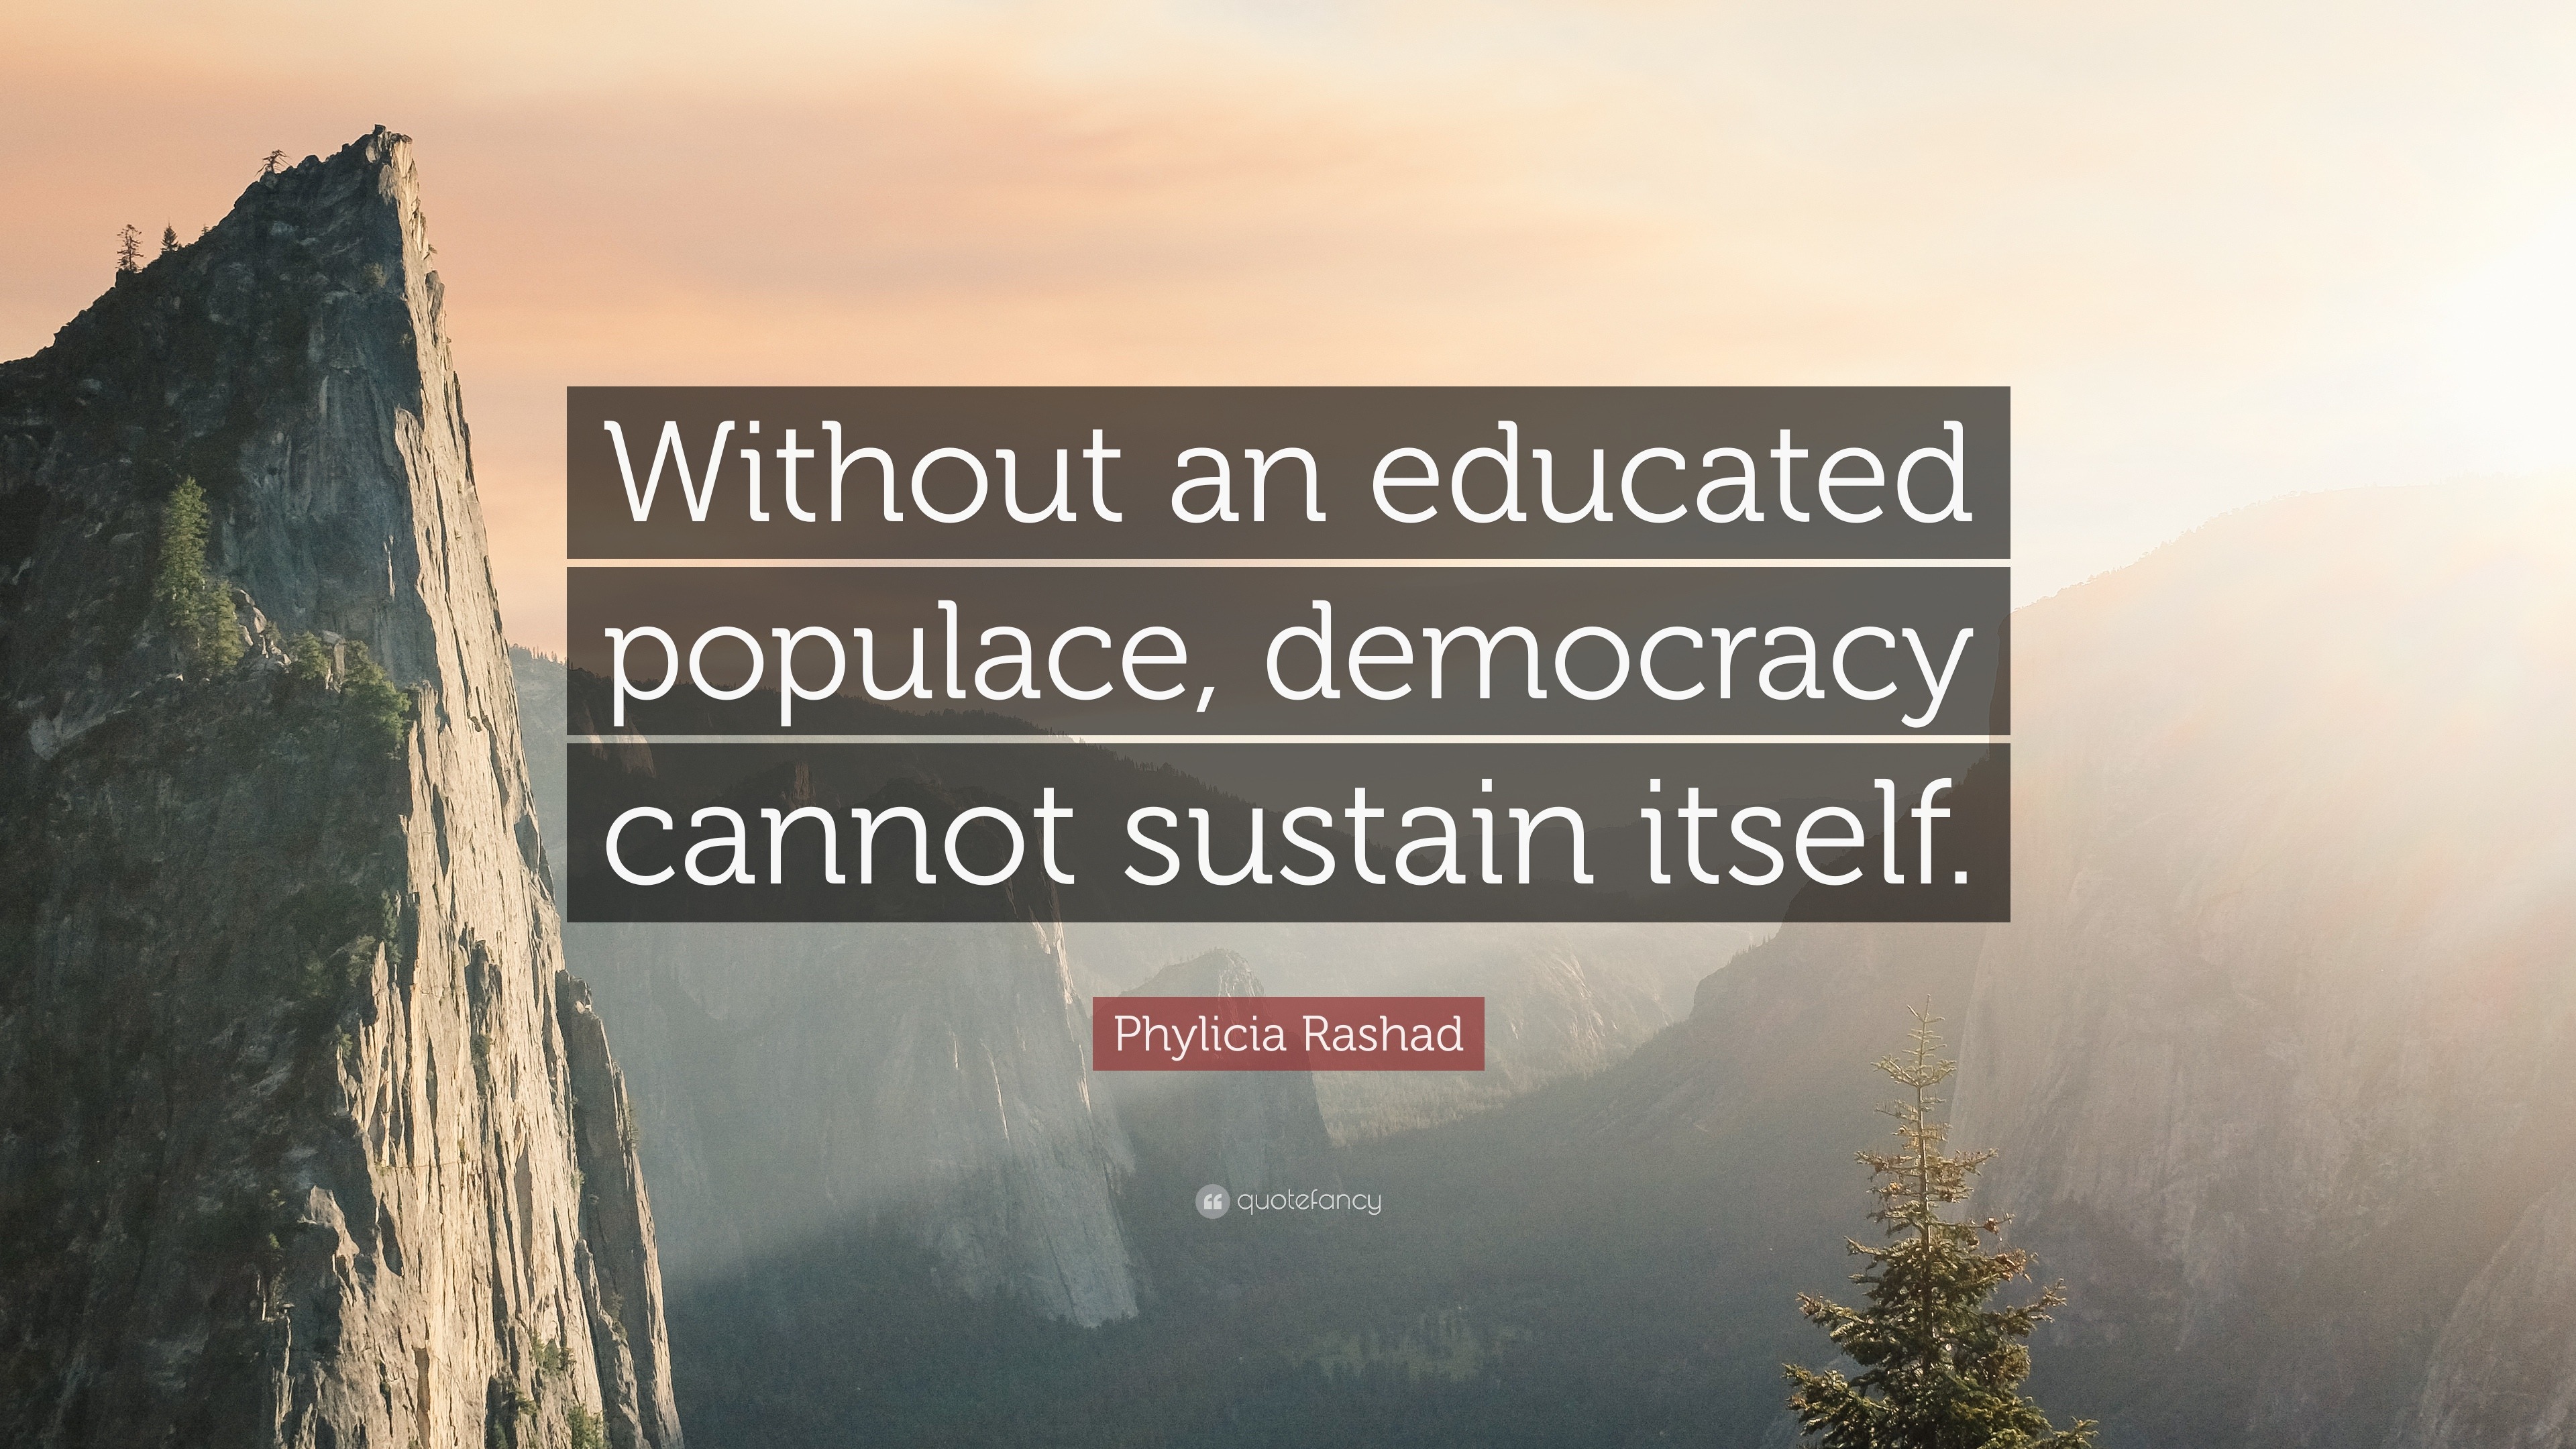 essay on democracy cannot survive without education